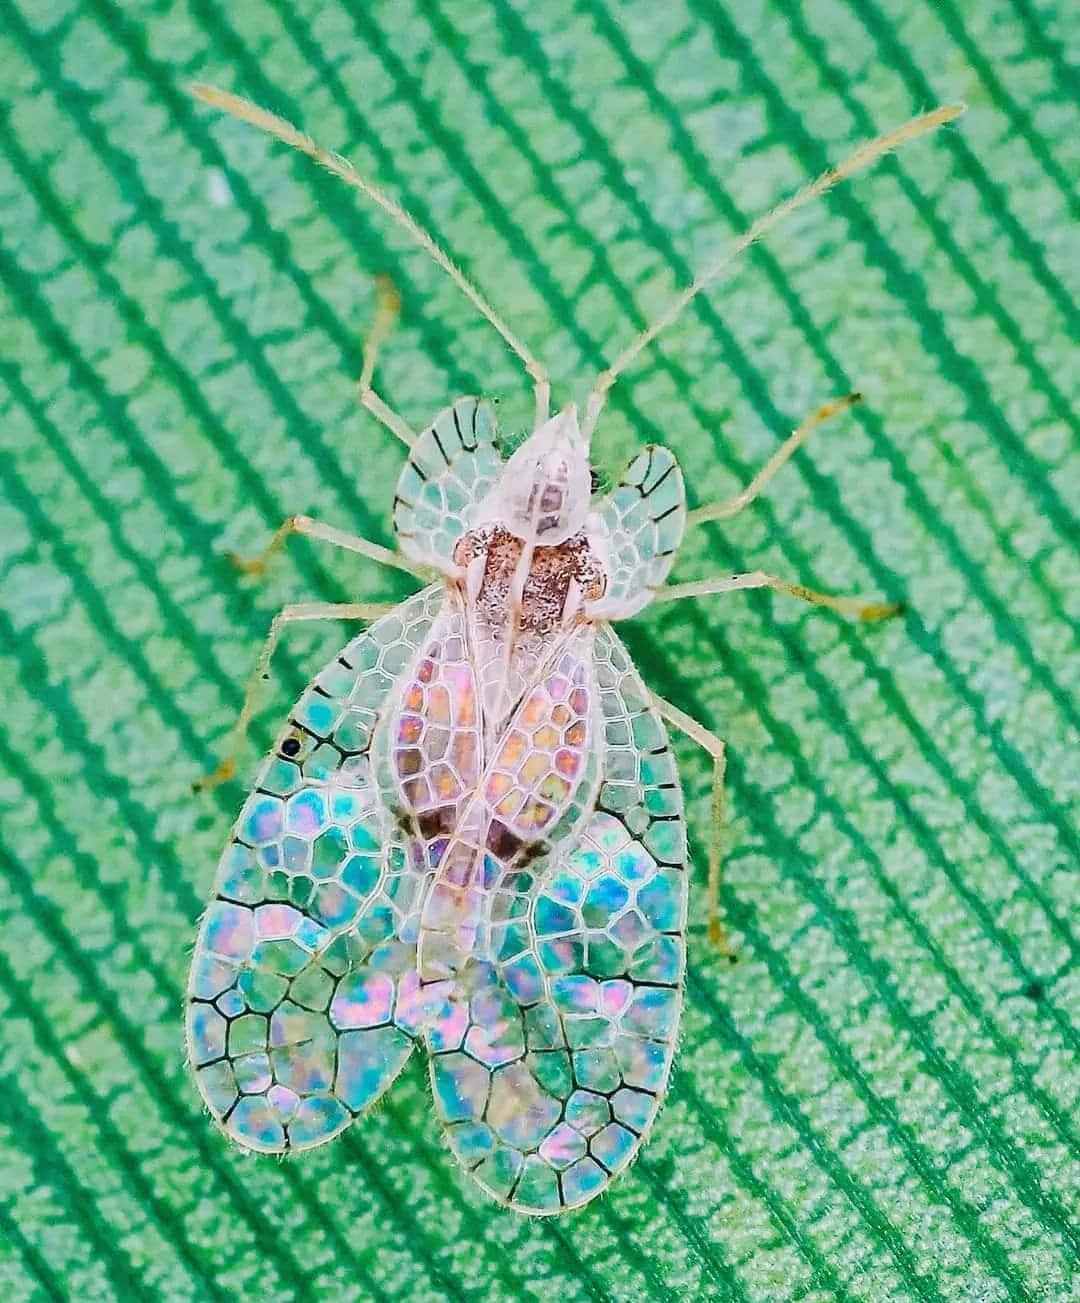 Iridescent Lace Bug On Leaf Wallpaper